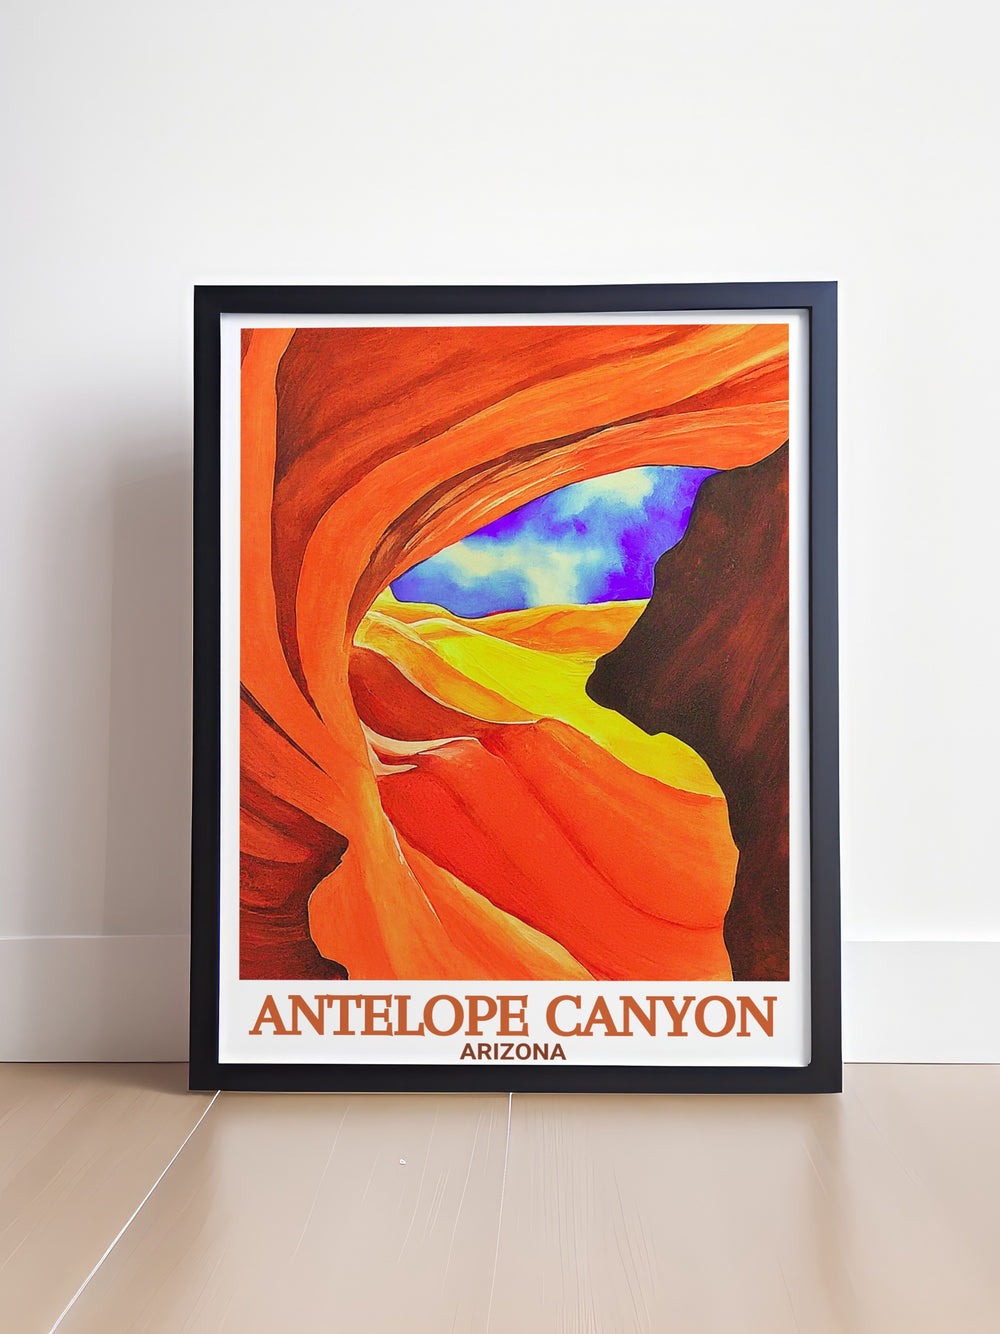 Beautiful Antelope Canyon artwork featuring the mesmerizing light beams and sandstone textures that make this Arizona wonder a favorite among travelers and photographers ideal for Arizona travel decor and modern art lovers.